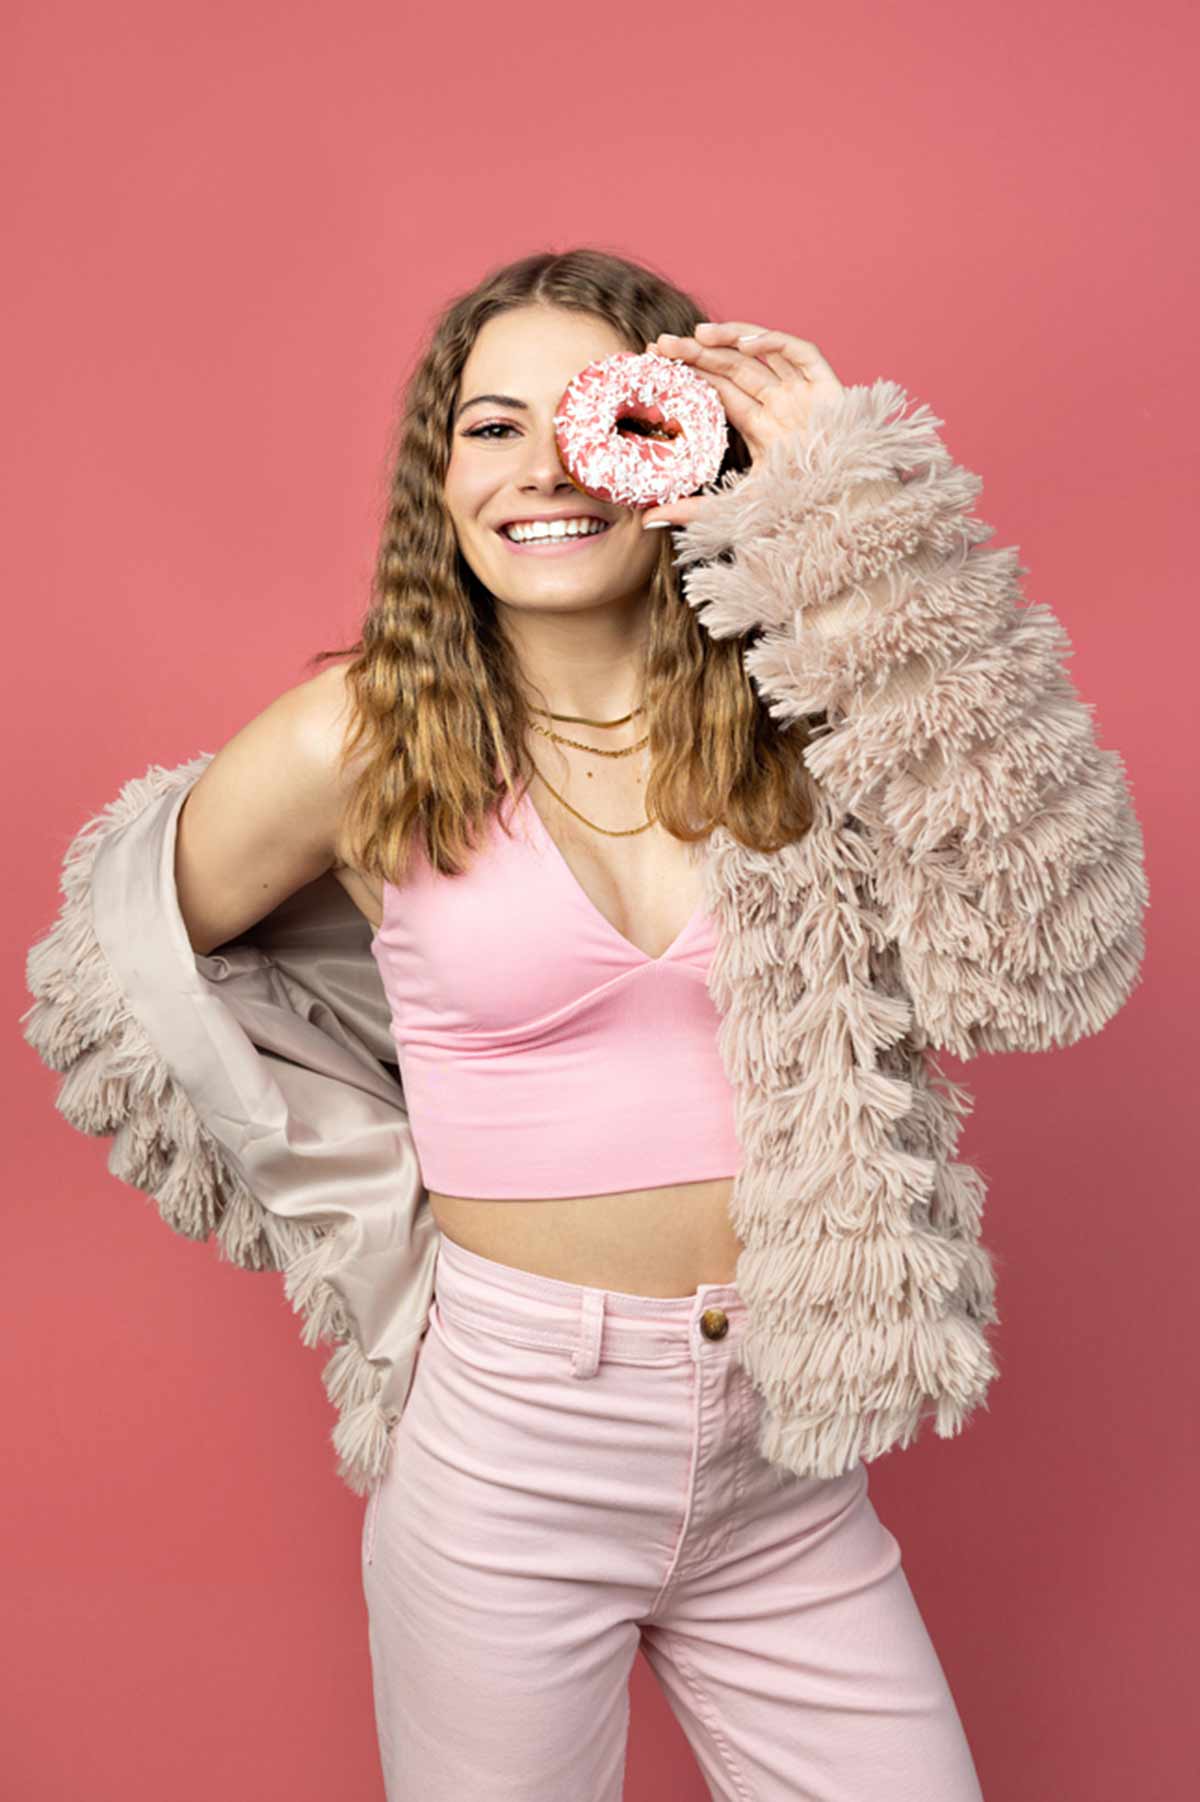 A monochromatic themed photo of a girl in all pink on a pink background holding a cute sprinkled donut as a prop for the PBD Model Team